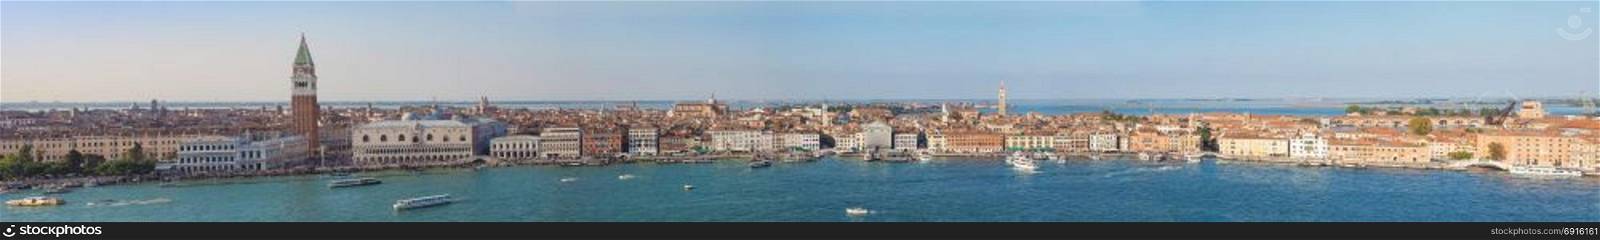 View of the city of Venice. Wide panoramic view of the city of Venice, including Piazza San Marco (meaning St Mark Square) of Venice, Italy